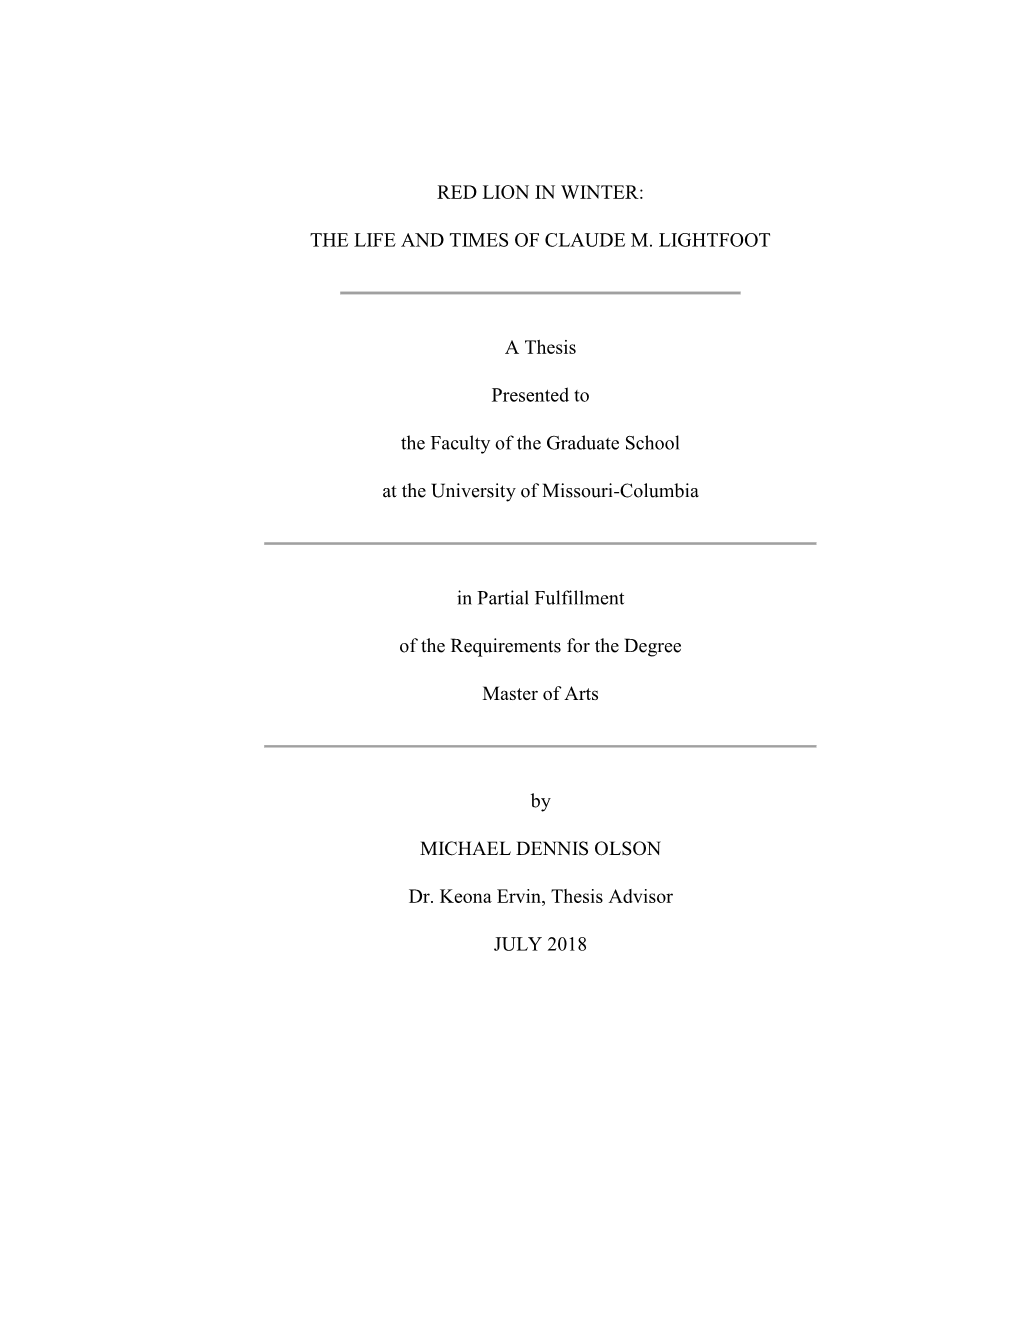 THE LIFE and TIMES of CLAUDE M. LIGHTFOOT a Thesis